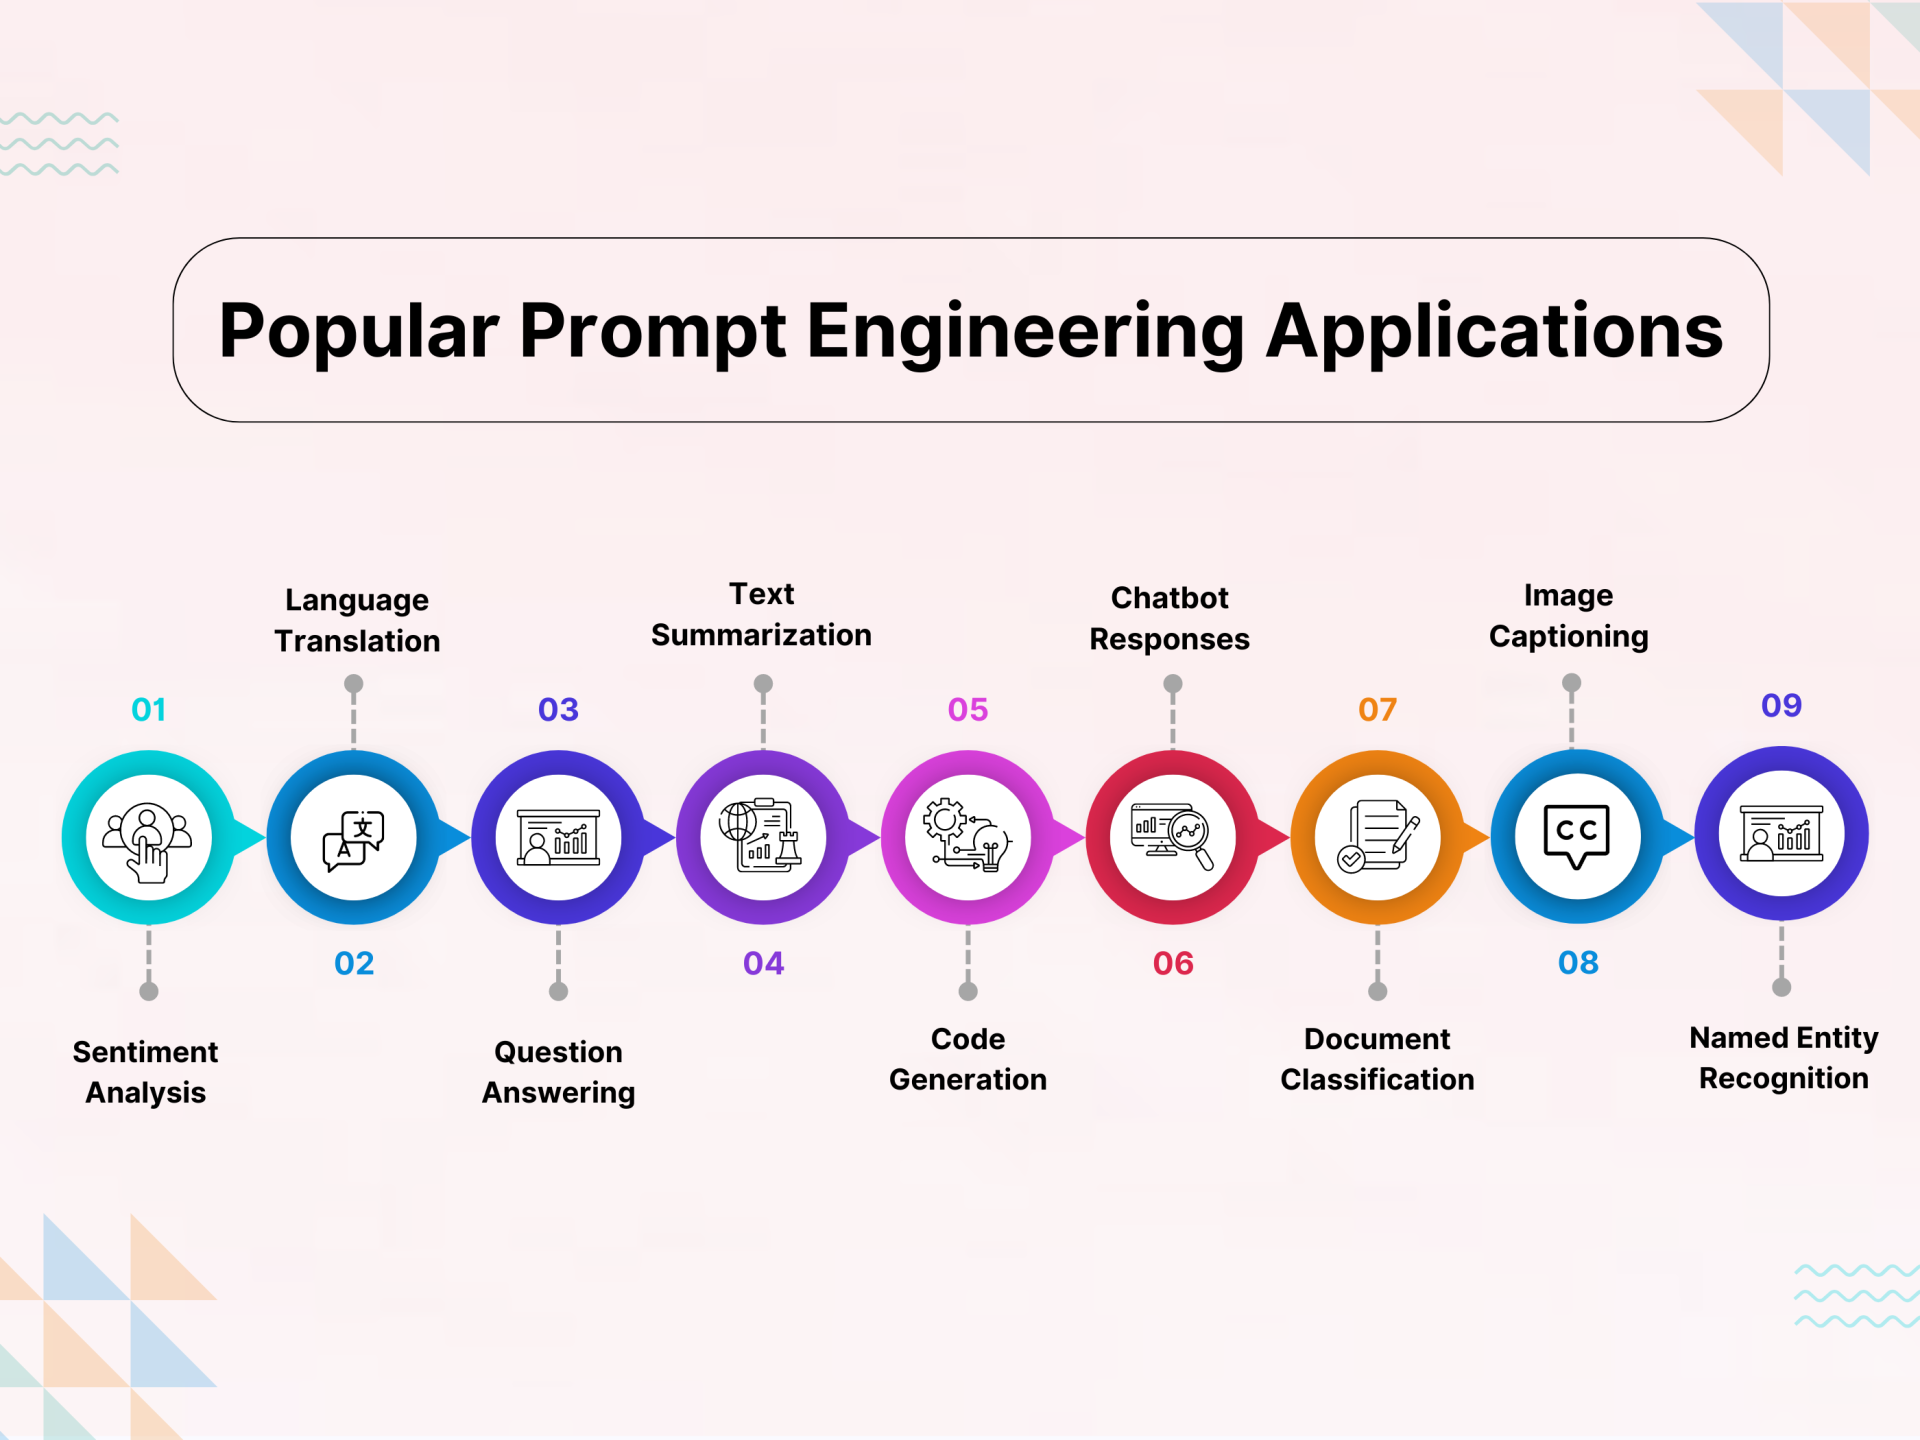 Prompt engineering applications